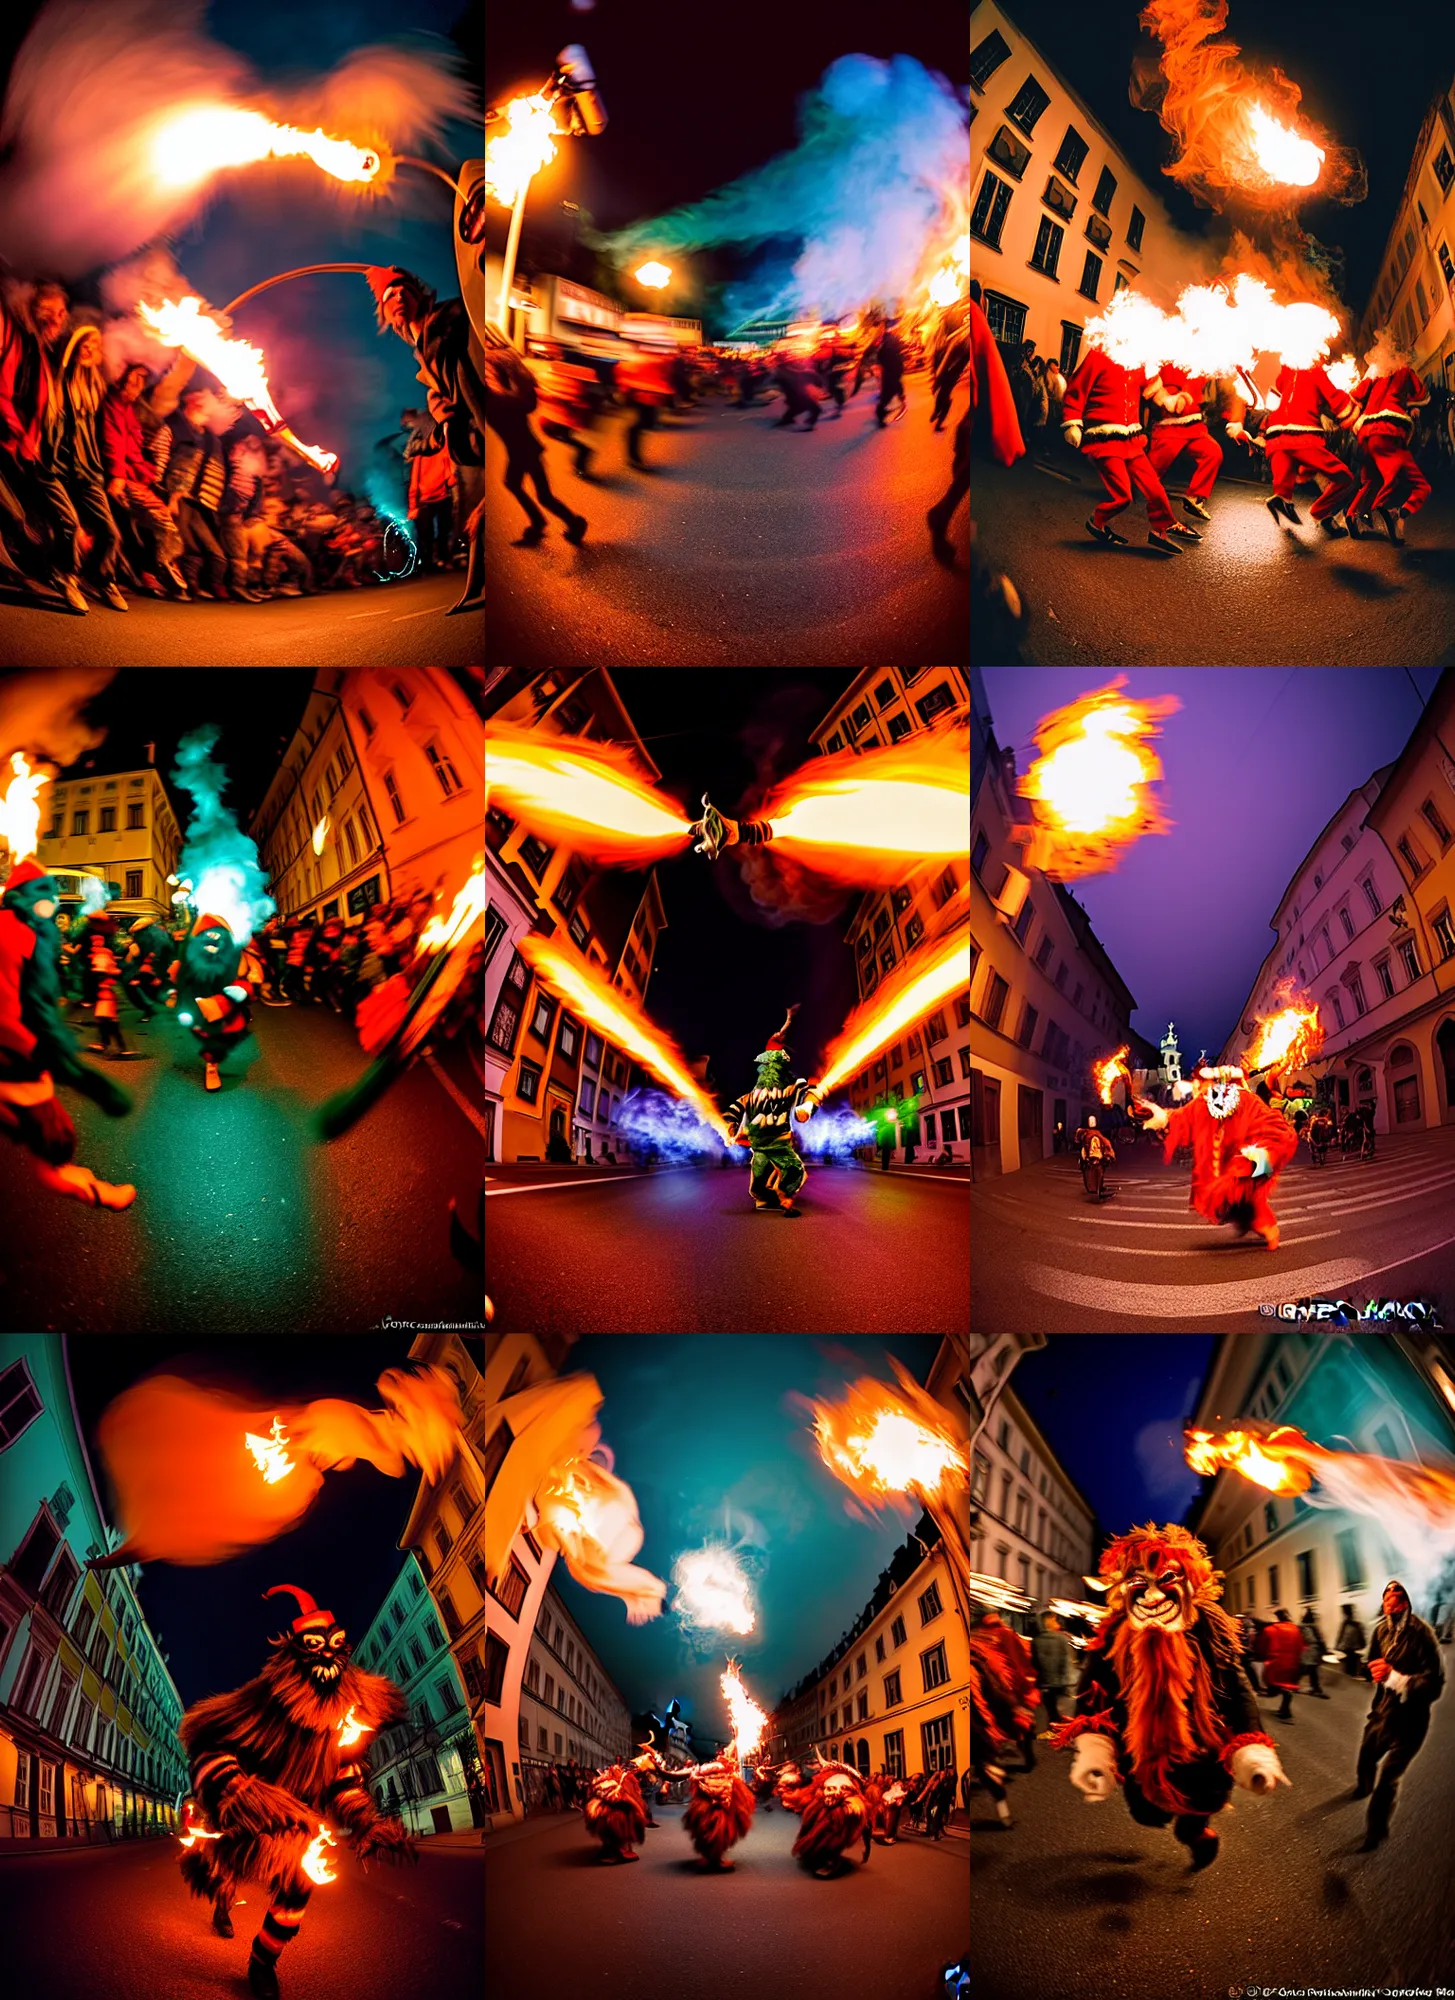 Prompt: kodak portra 4 0 0, award winning dynamic fisheye photograph of hundreds of running hazardous krampus by robert capas, in muted colours, striped orange and teal, motion blur, on a street in salzburg at night with colourful pyro fire and torches